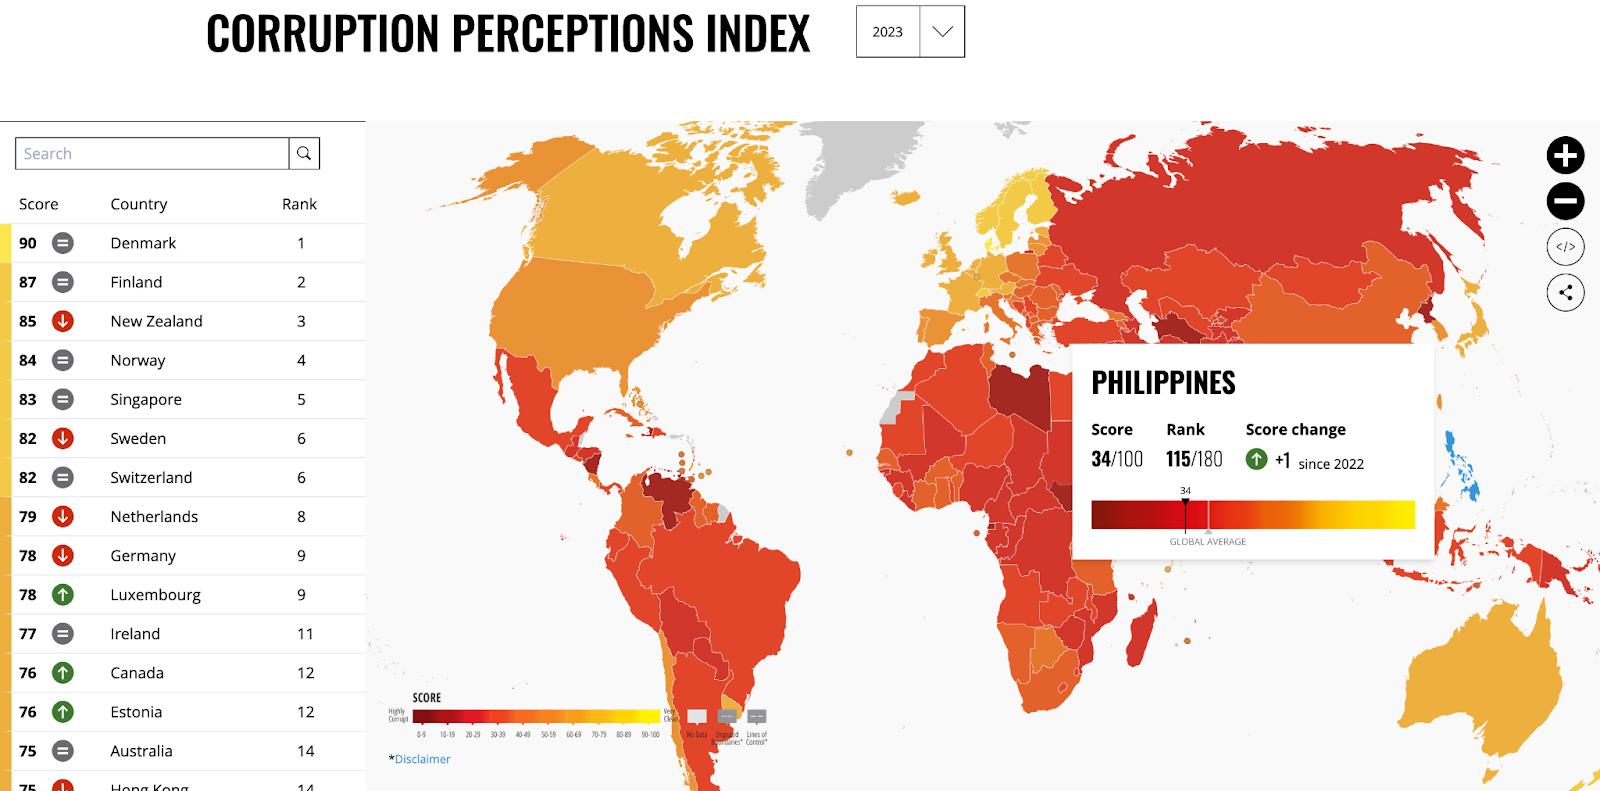 Philippines' Corruption Perceptions Index ranking eases